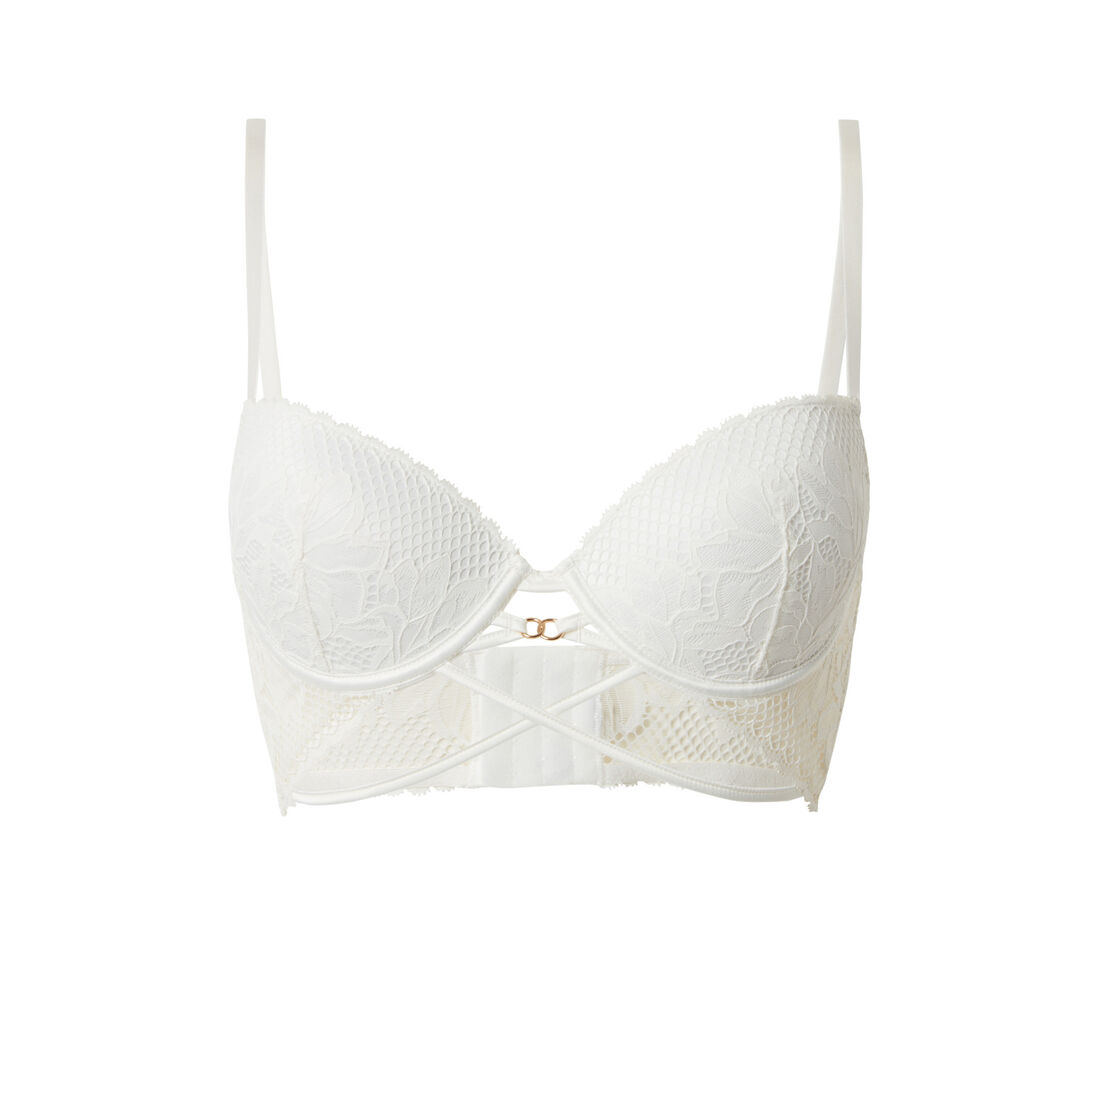 lace push-up bustier bra with ties and ring details - ecru;